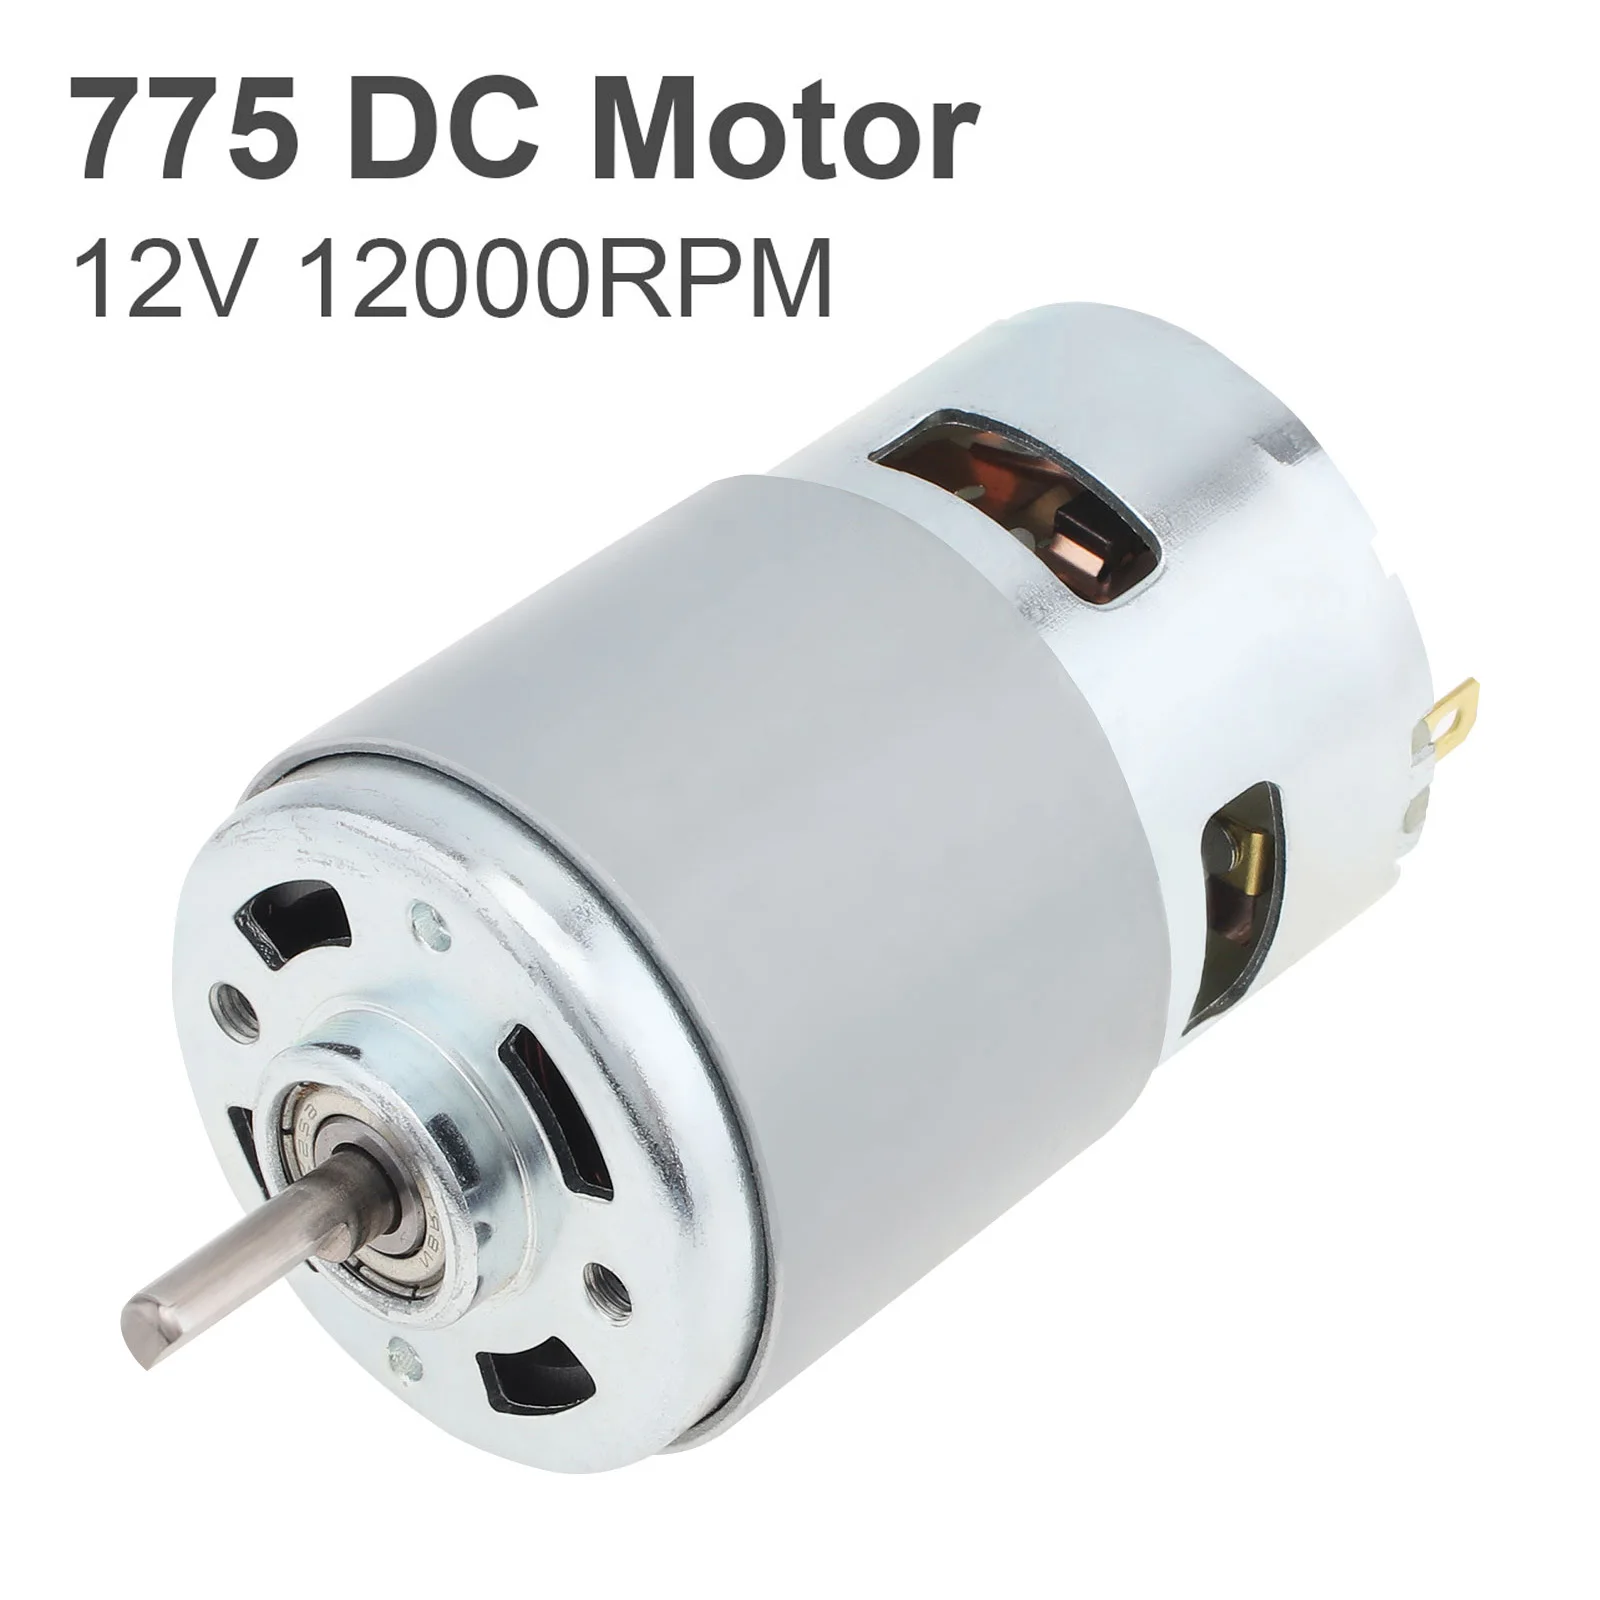 

775 DC Motor D-Shaped Shaft 12V 12000RPM High-speed Torque Motor for Drill Micro Machine / DIY Model Car with Ball Bearing